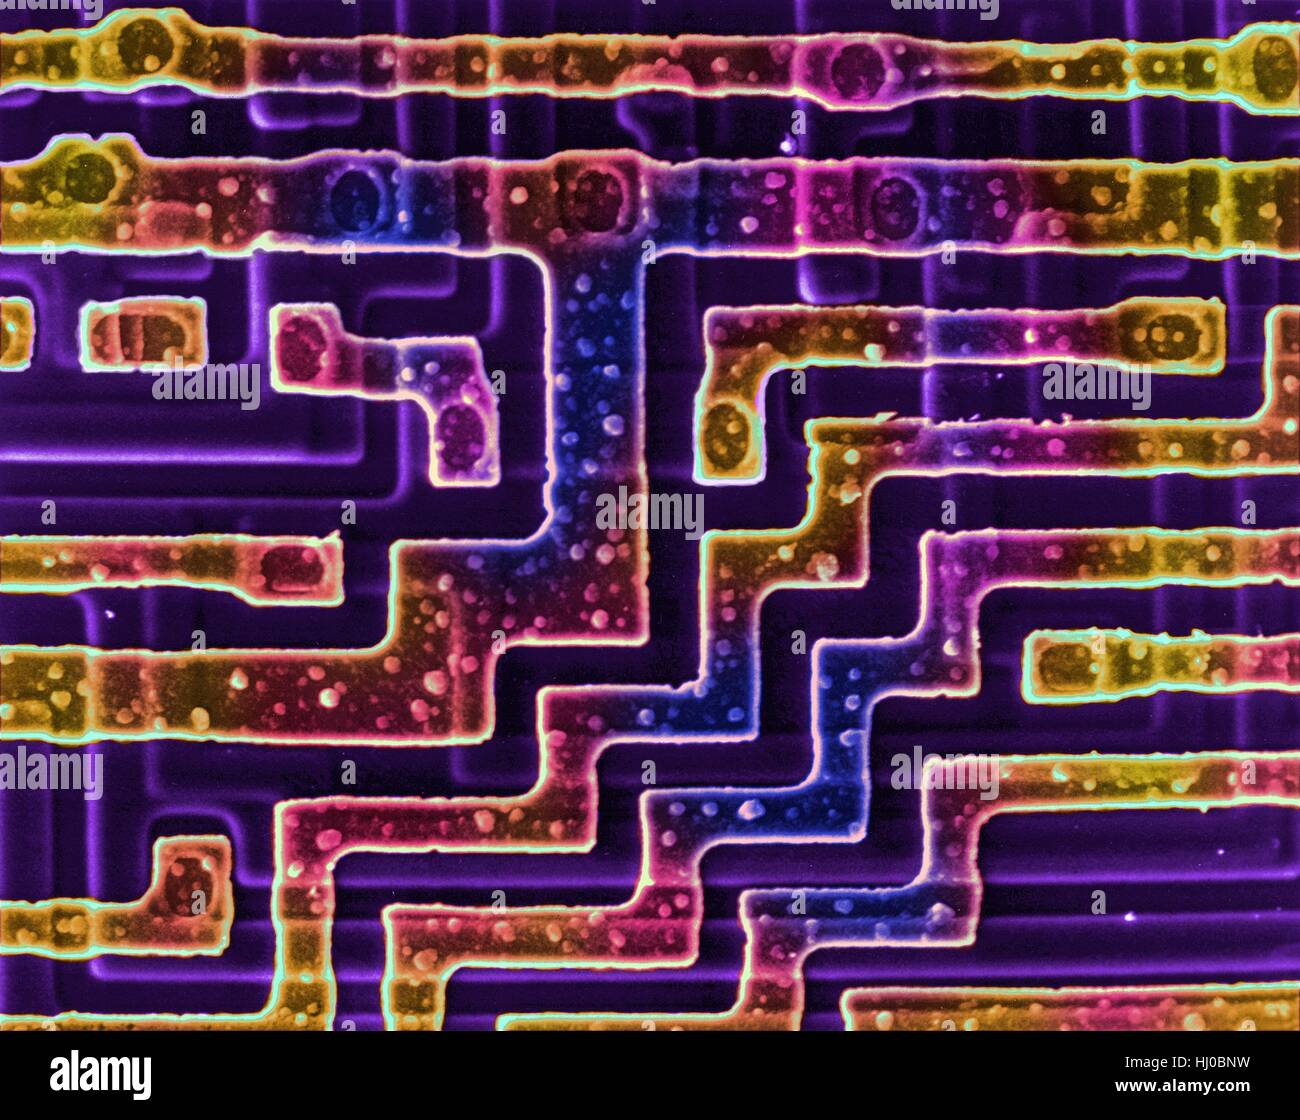 Coloured scanning electron micrograph (SEM) of Surface of a random access memory chip (integrated circuit). A RAM chip (Random Access Memory) is the computer's temporary data storage. A RAM device allows data items to be accessed (read or written) in almost the same amount of time irrespective of the physical location of data inside the memory. Magnification: x63 when shortest axis printed at 25 millimetres. Stock Photo